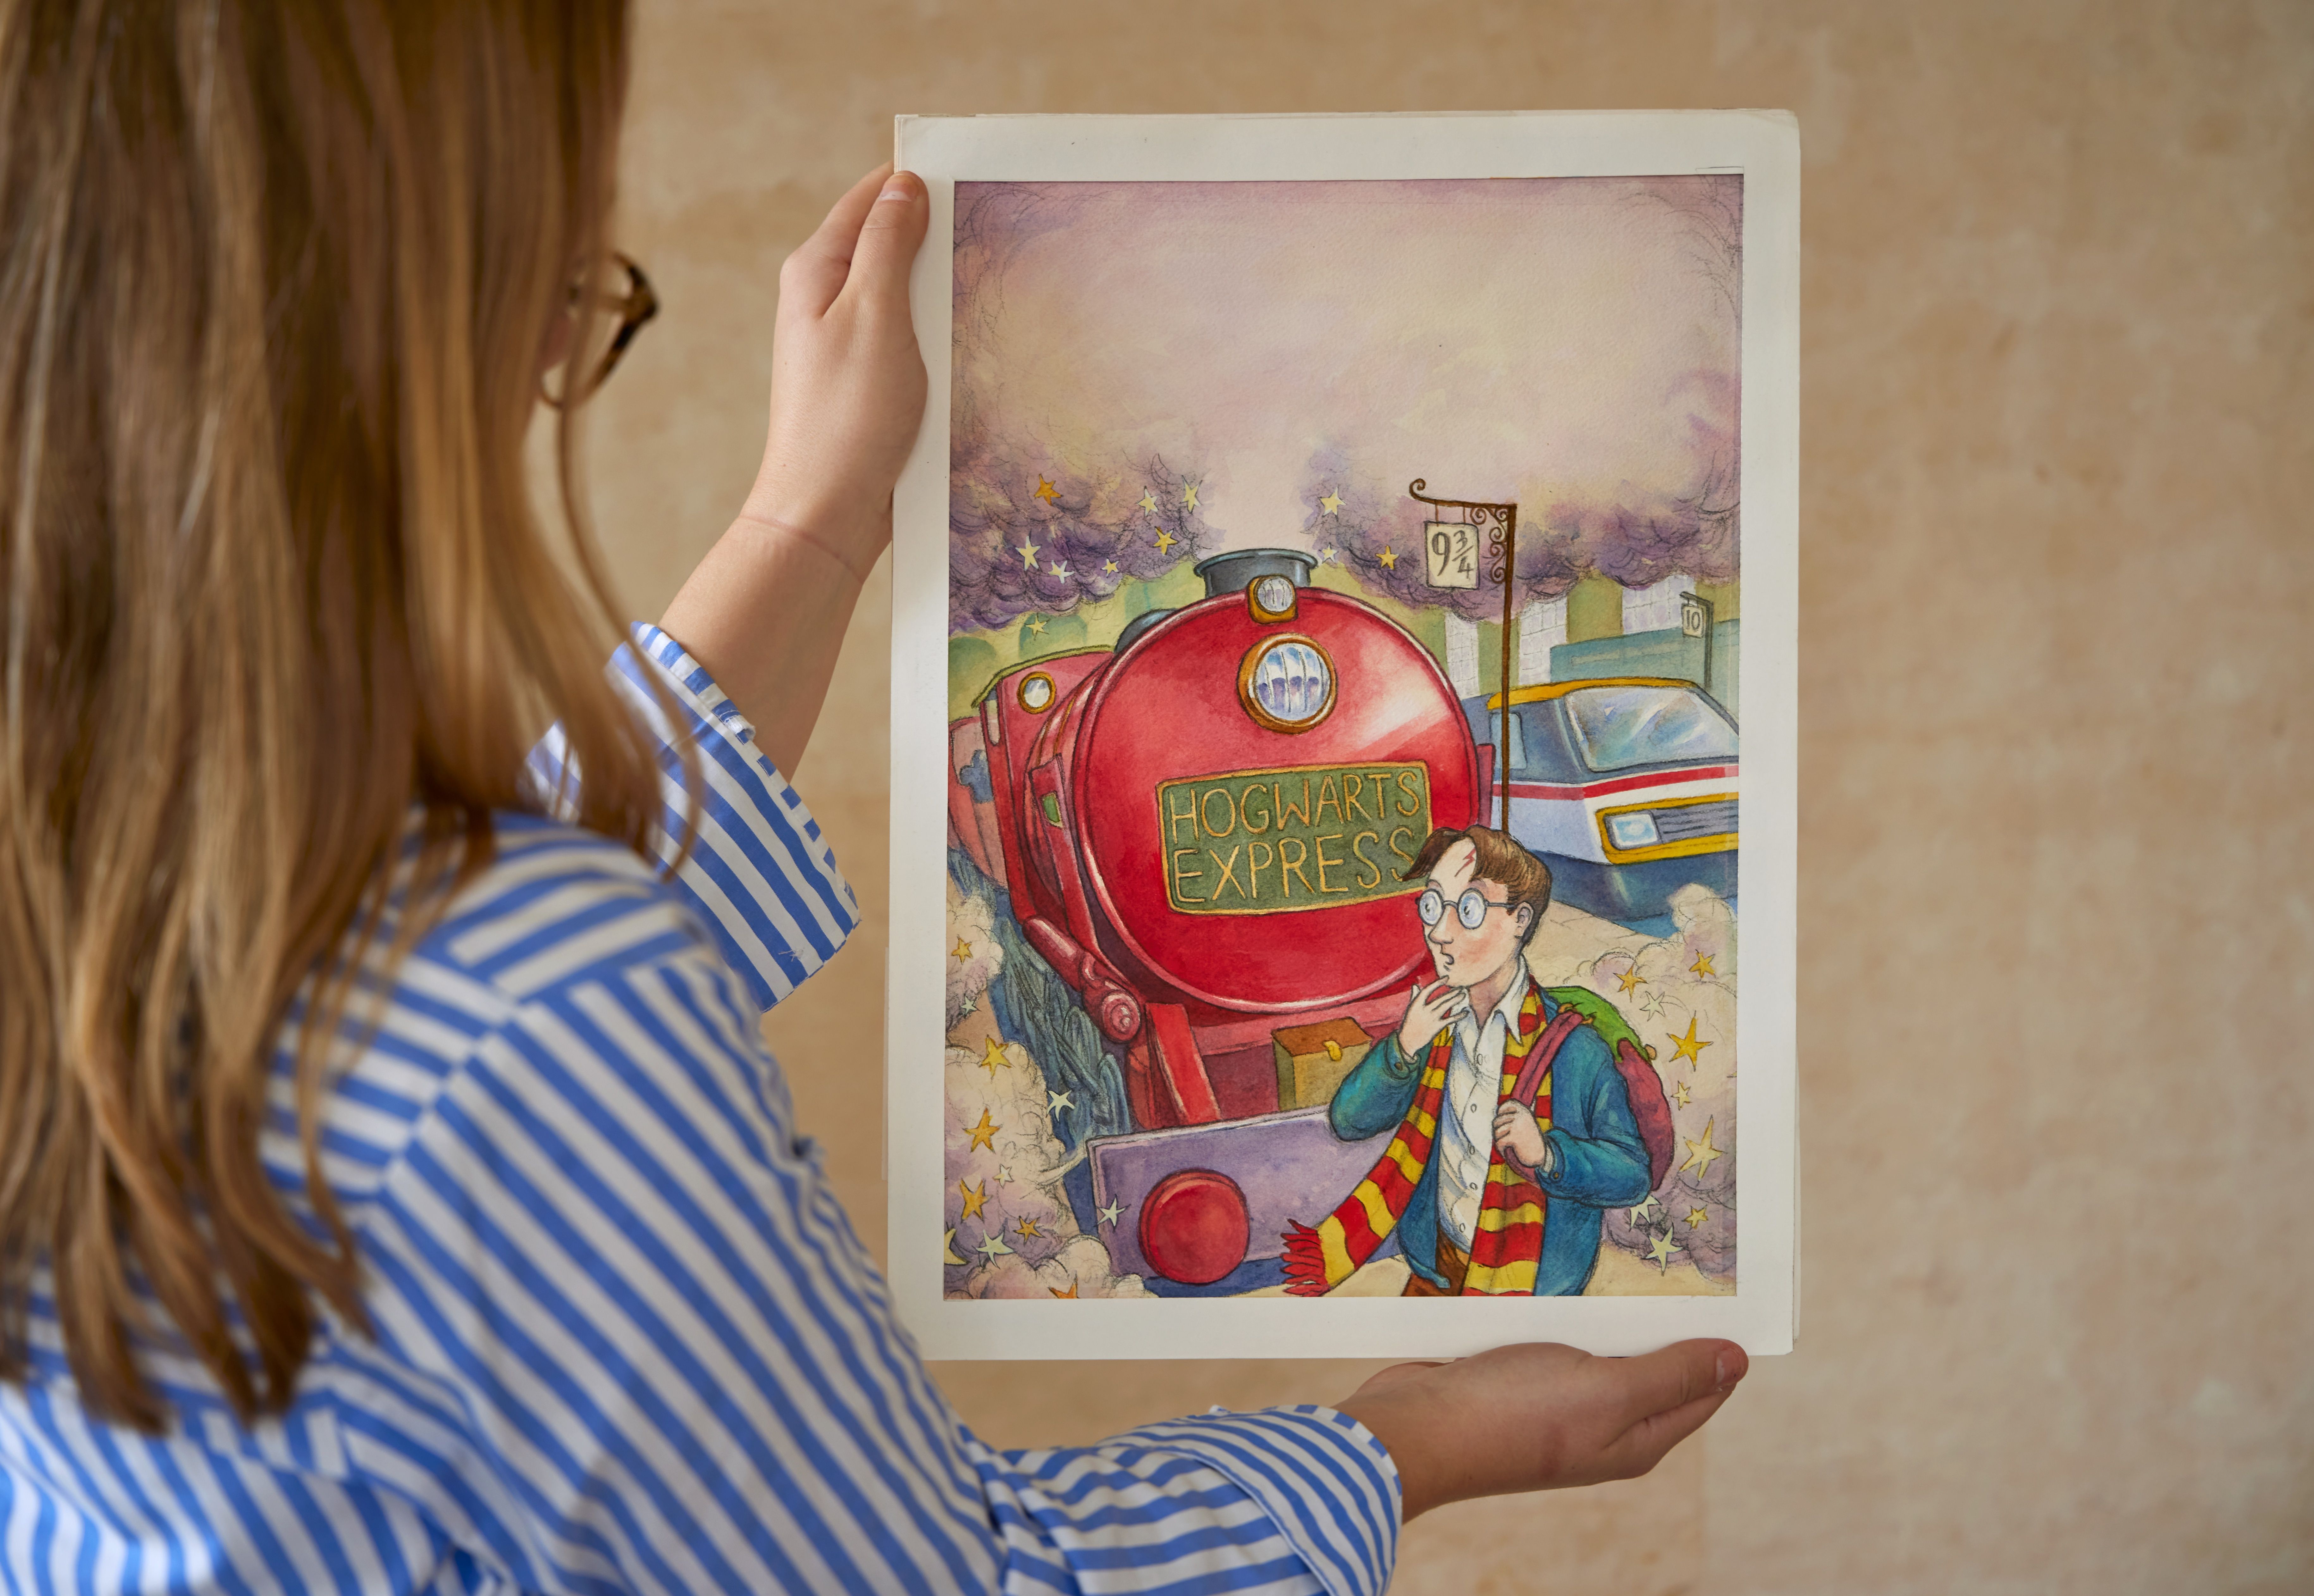 Sotheby’s will be offering the original watercolor illustration for Harry Potter and the Philosopher's Stone